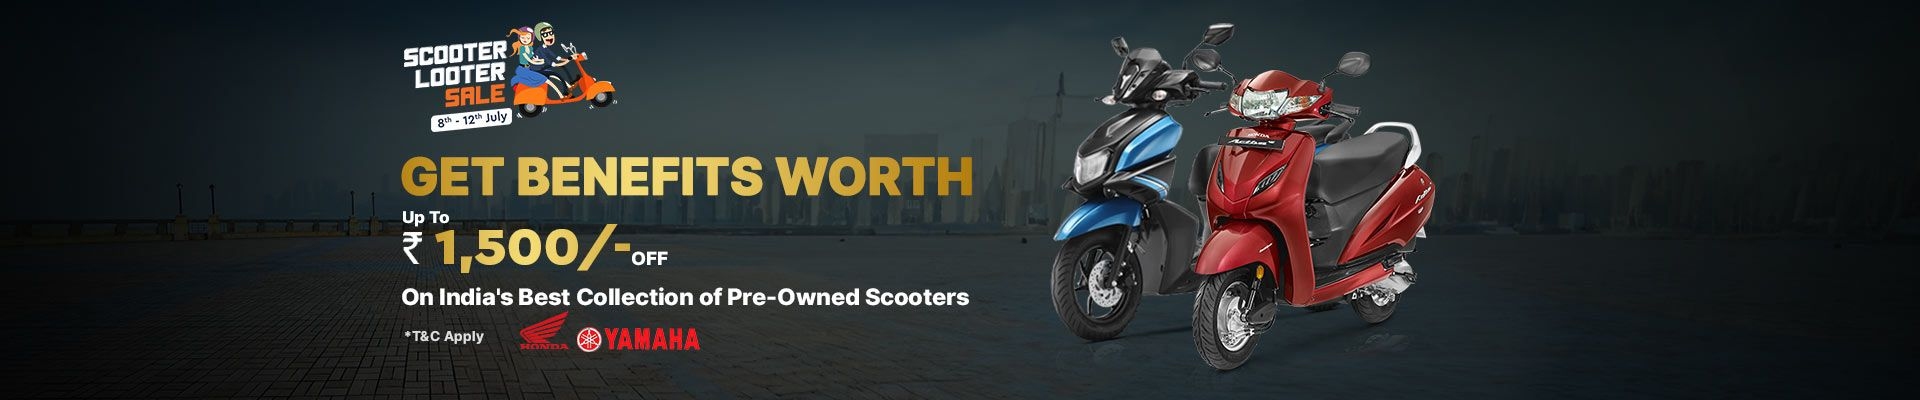 Scooter Looter | Droom